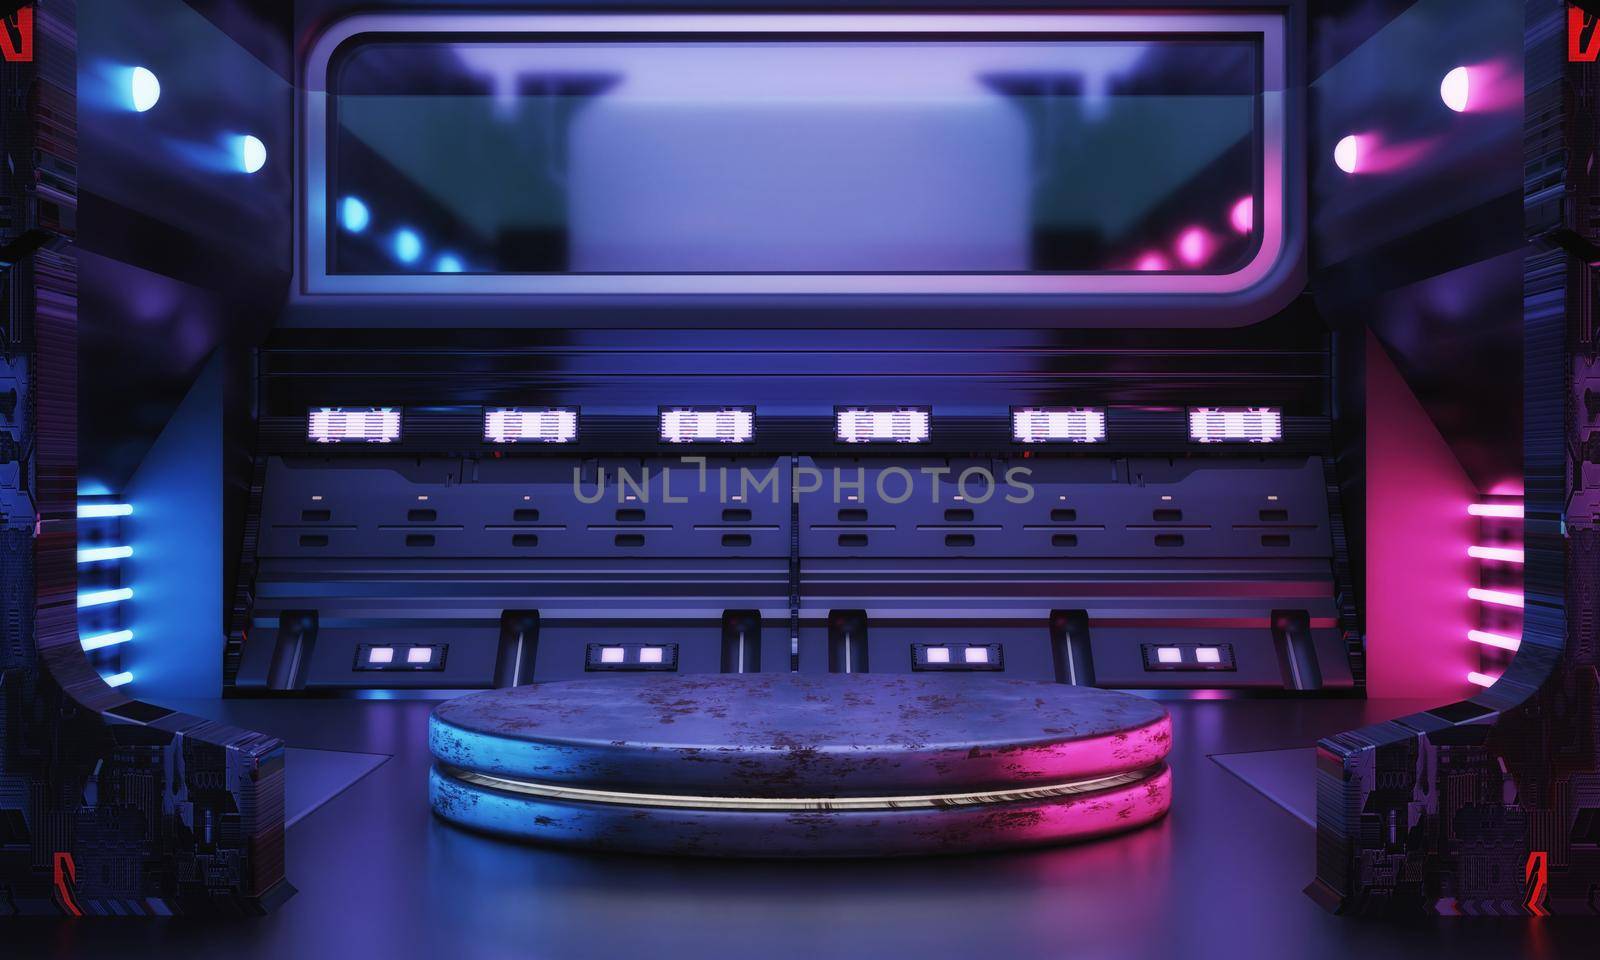 Cyberpunk sci-fi product podium showcase in empty spaceship room with blue and pink background. Cosmos space technology and entertainment object concept. 3D illustration rendering by MiniStocker